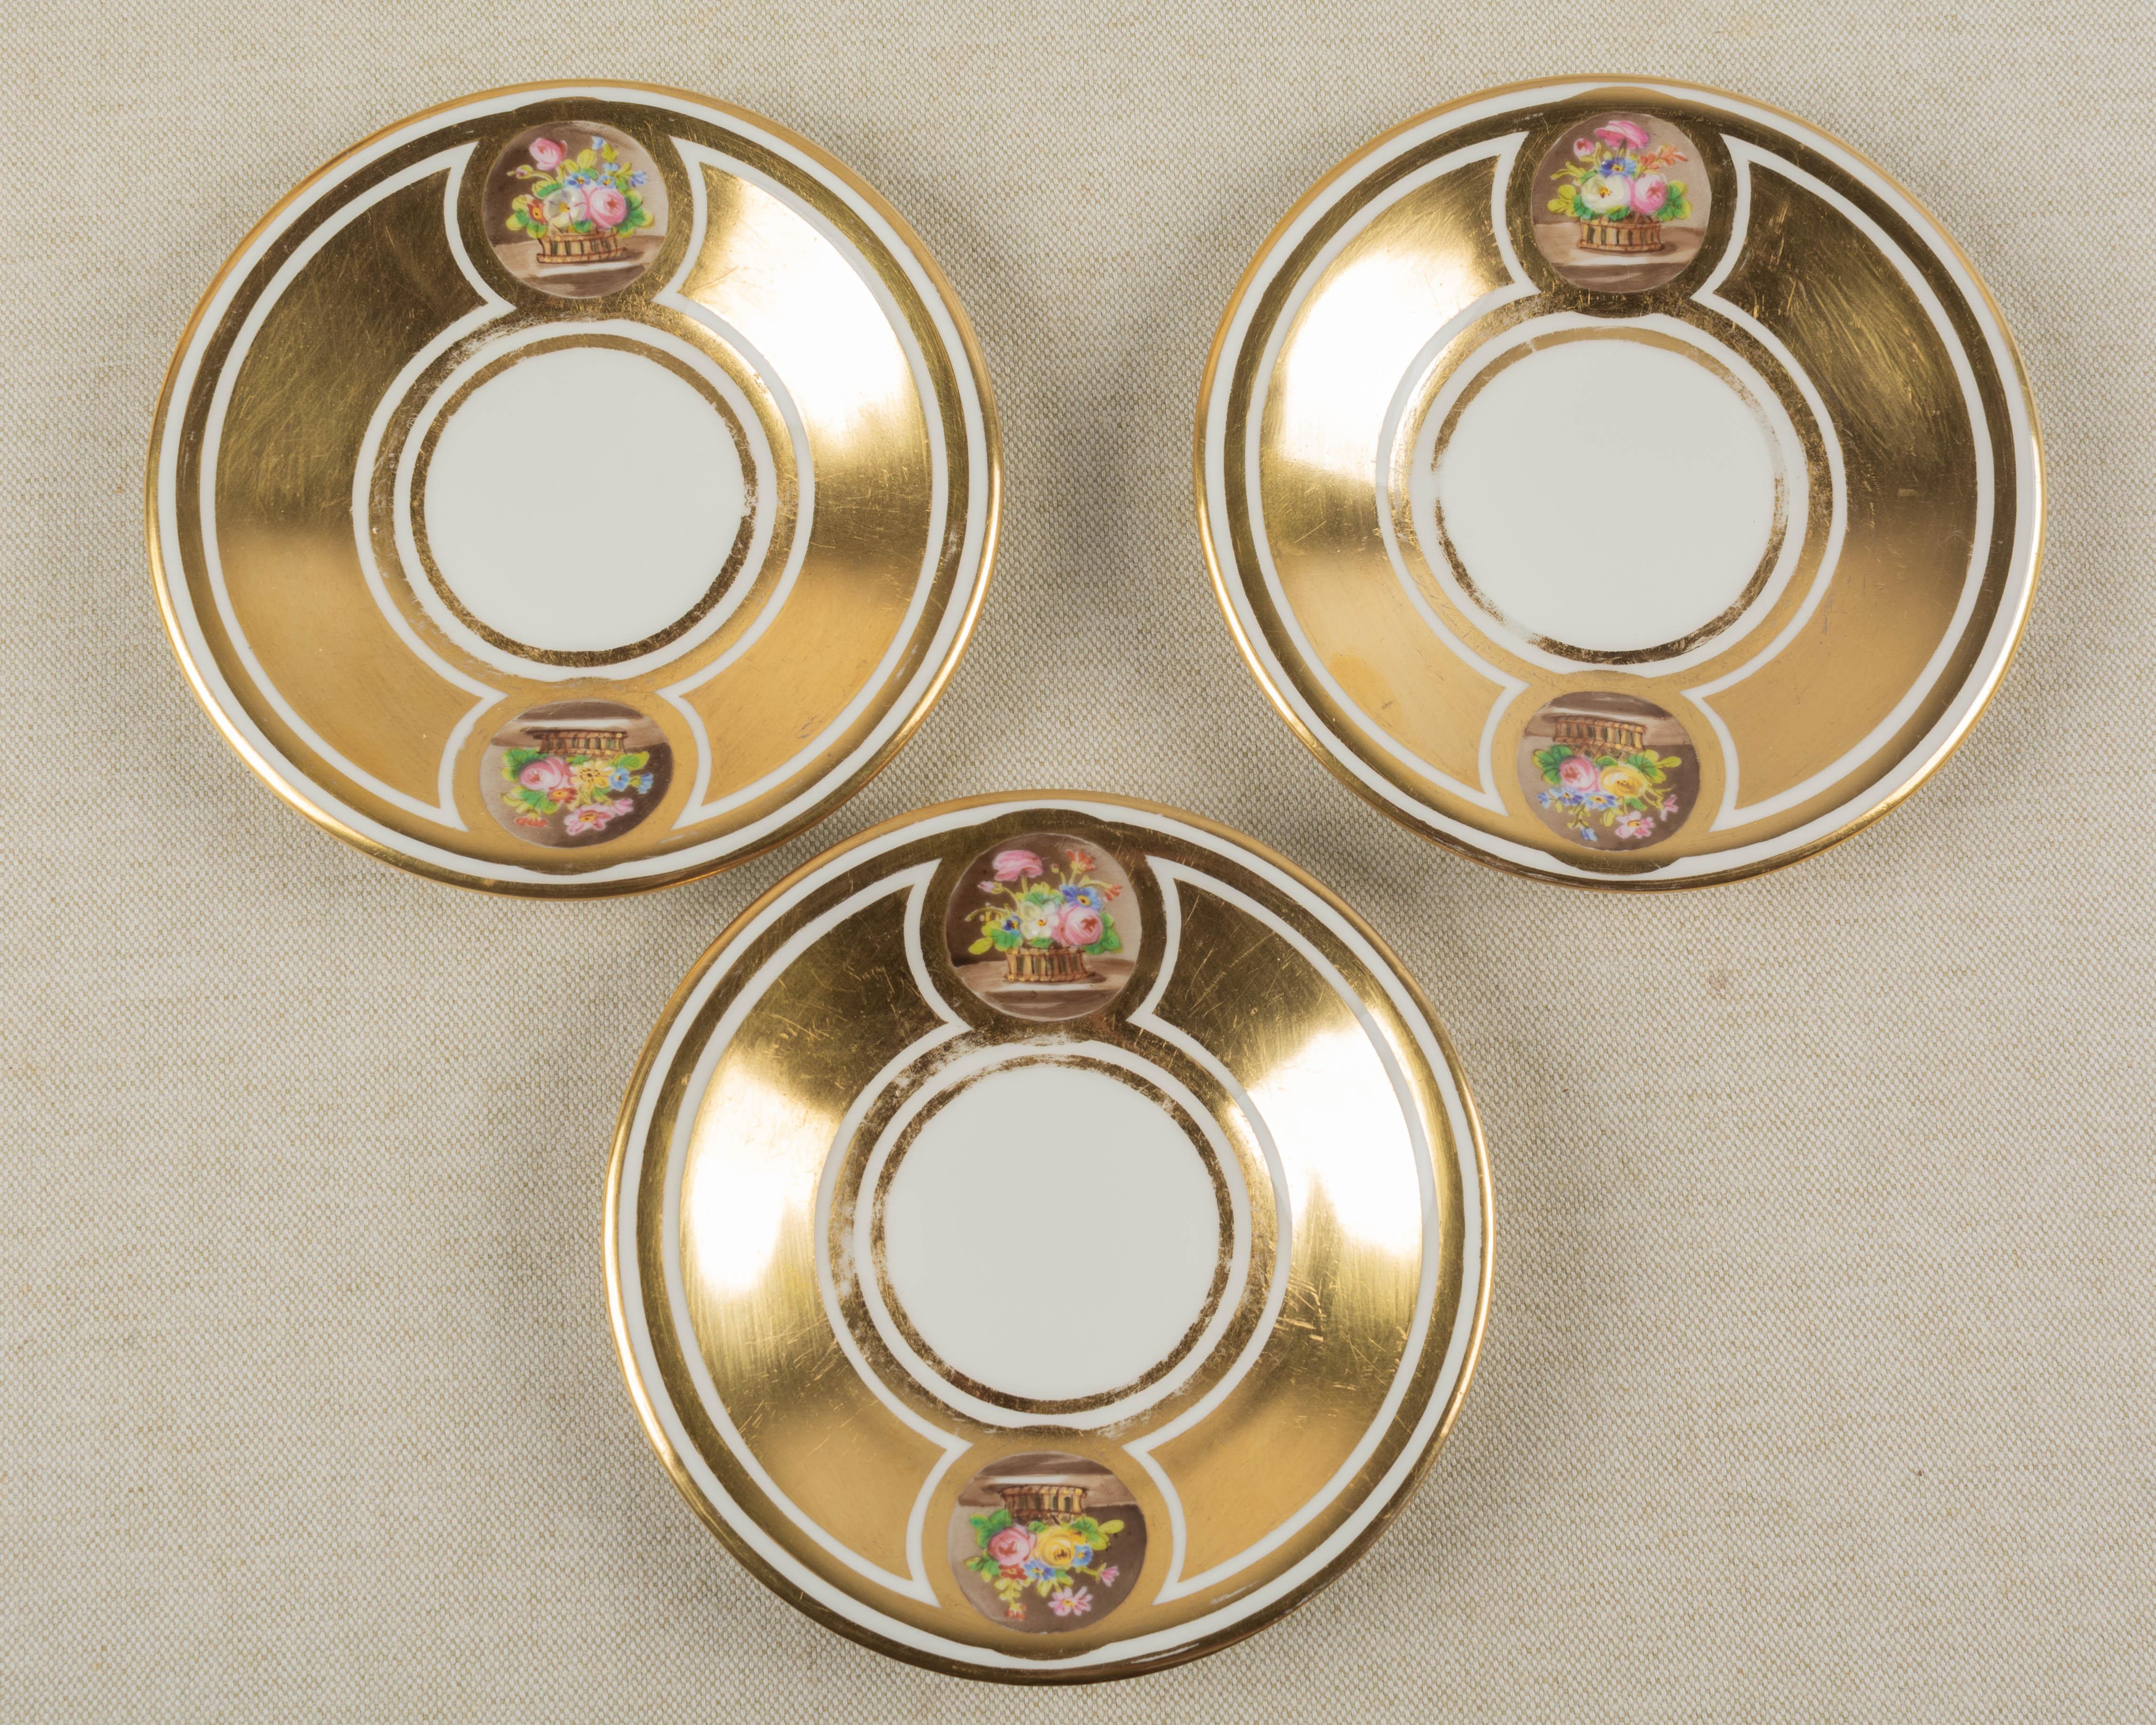 19th Century French Sèvres Gilt Porcelain Cup & Saucer, Set of 3 For Sale 4